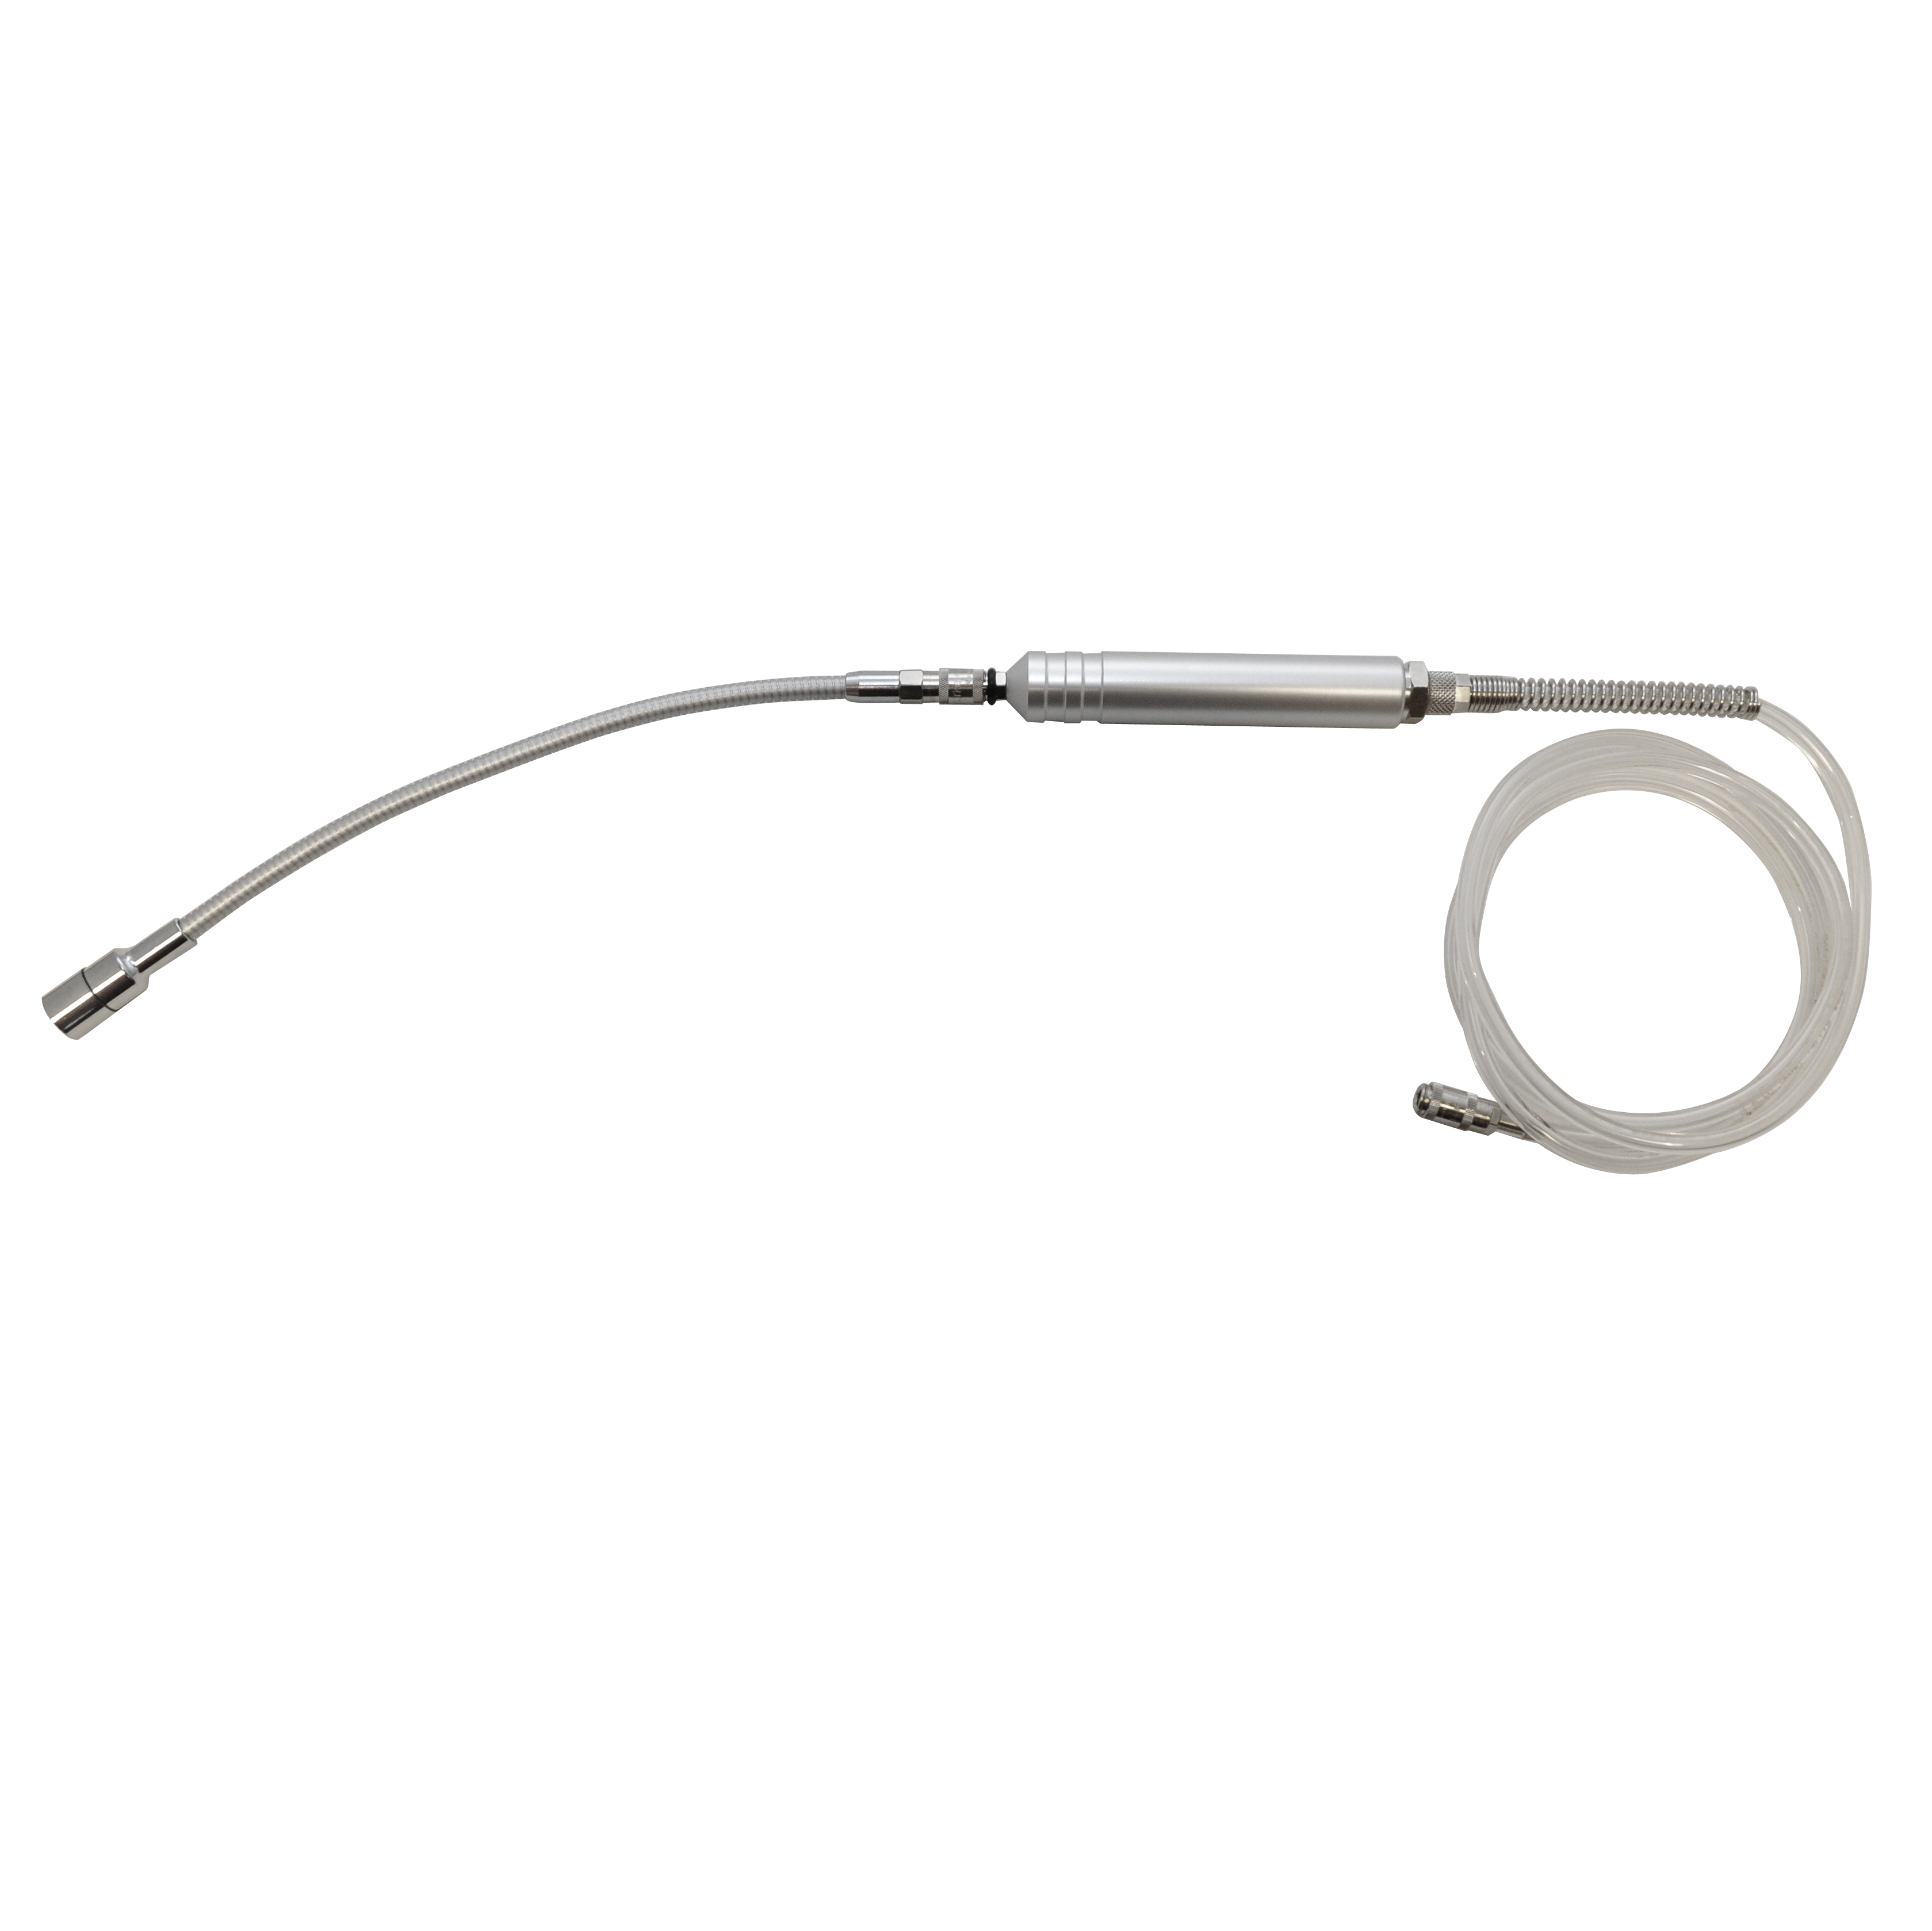 Air concentration probe V3 with flexible quick connection probe V3
overall length: 1,75 meters